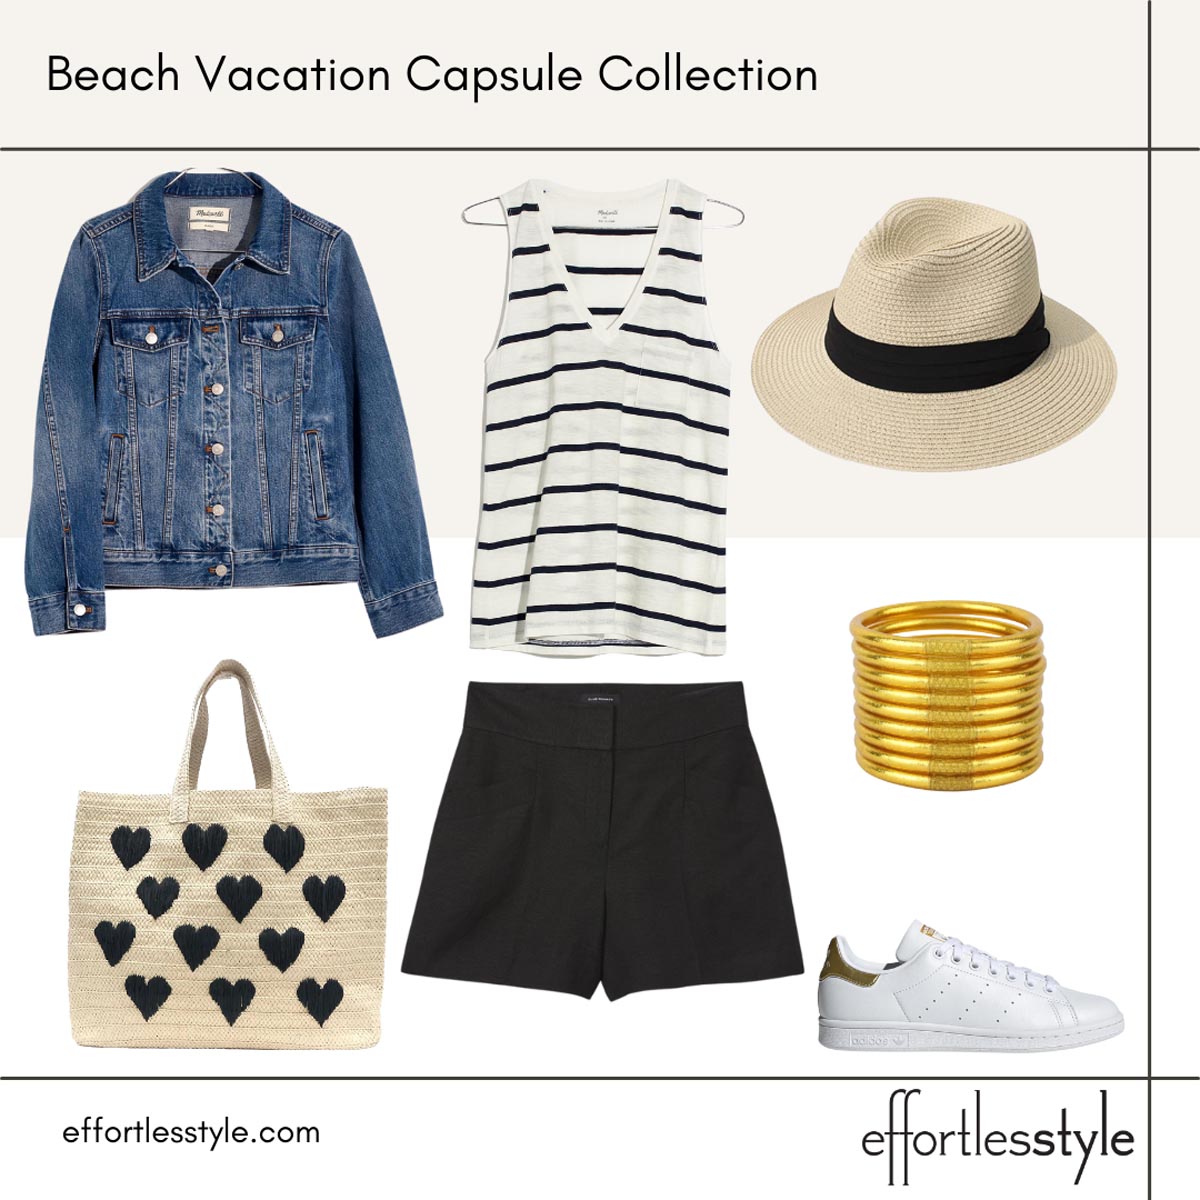 How to wear shorts at the beach how to wear sneakers with shorts all weather bangles waterproof bracelets straw tote for summer well priced fedora sun hat for the beach